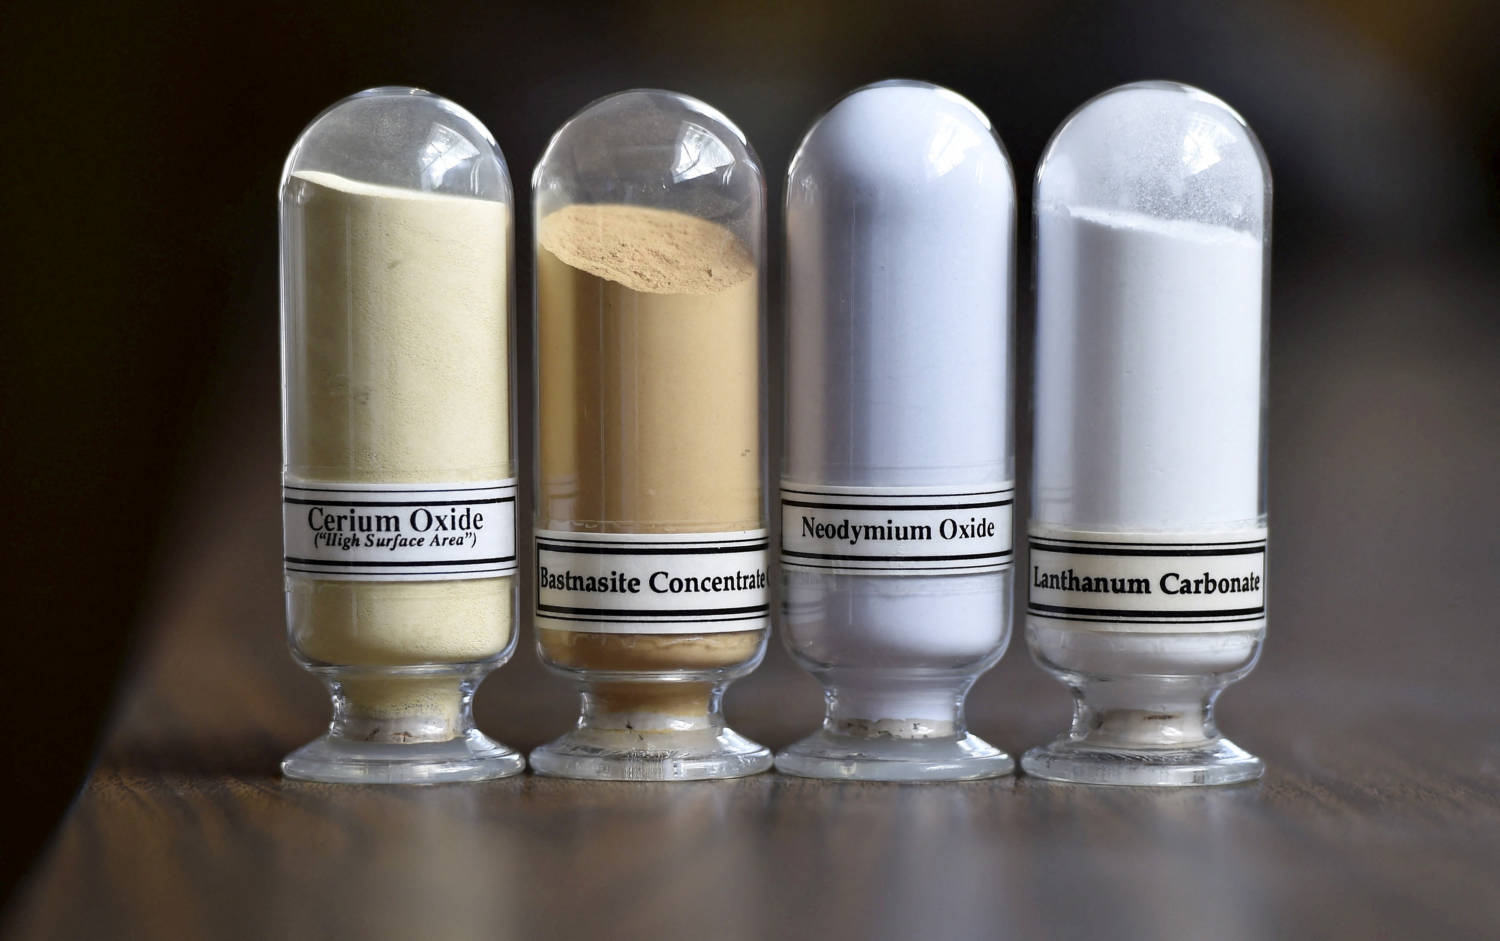 Samples Of Rare Earth Minerals, Cerium Oxide, Bastnasite, Neodymium Oxide And Lanthanum Carbonate Are On Display During A Tour Of Molycorp's Mountain Pass Rare Earth Facility In Mountain Pass, California